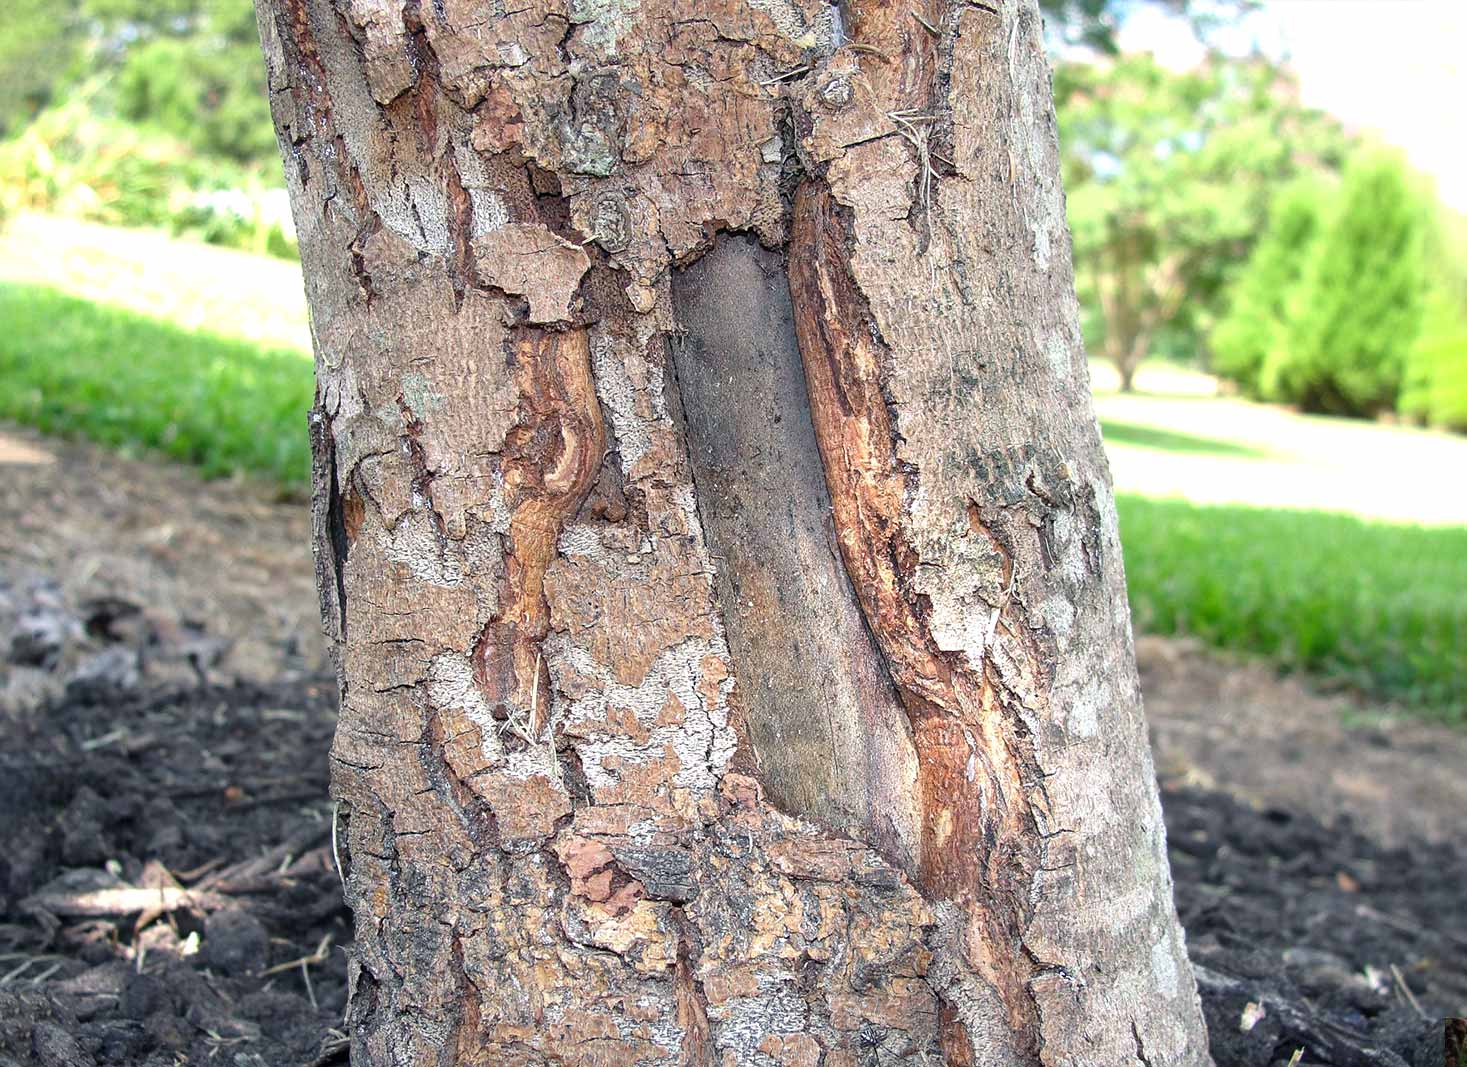 Trees most affected by sunscald